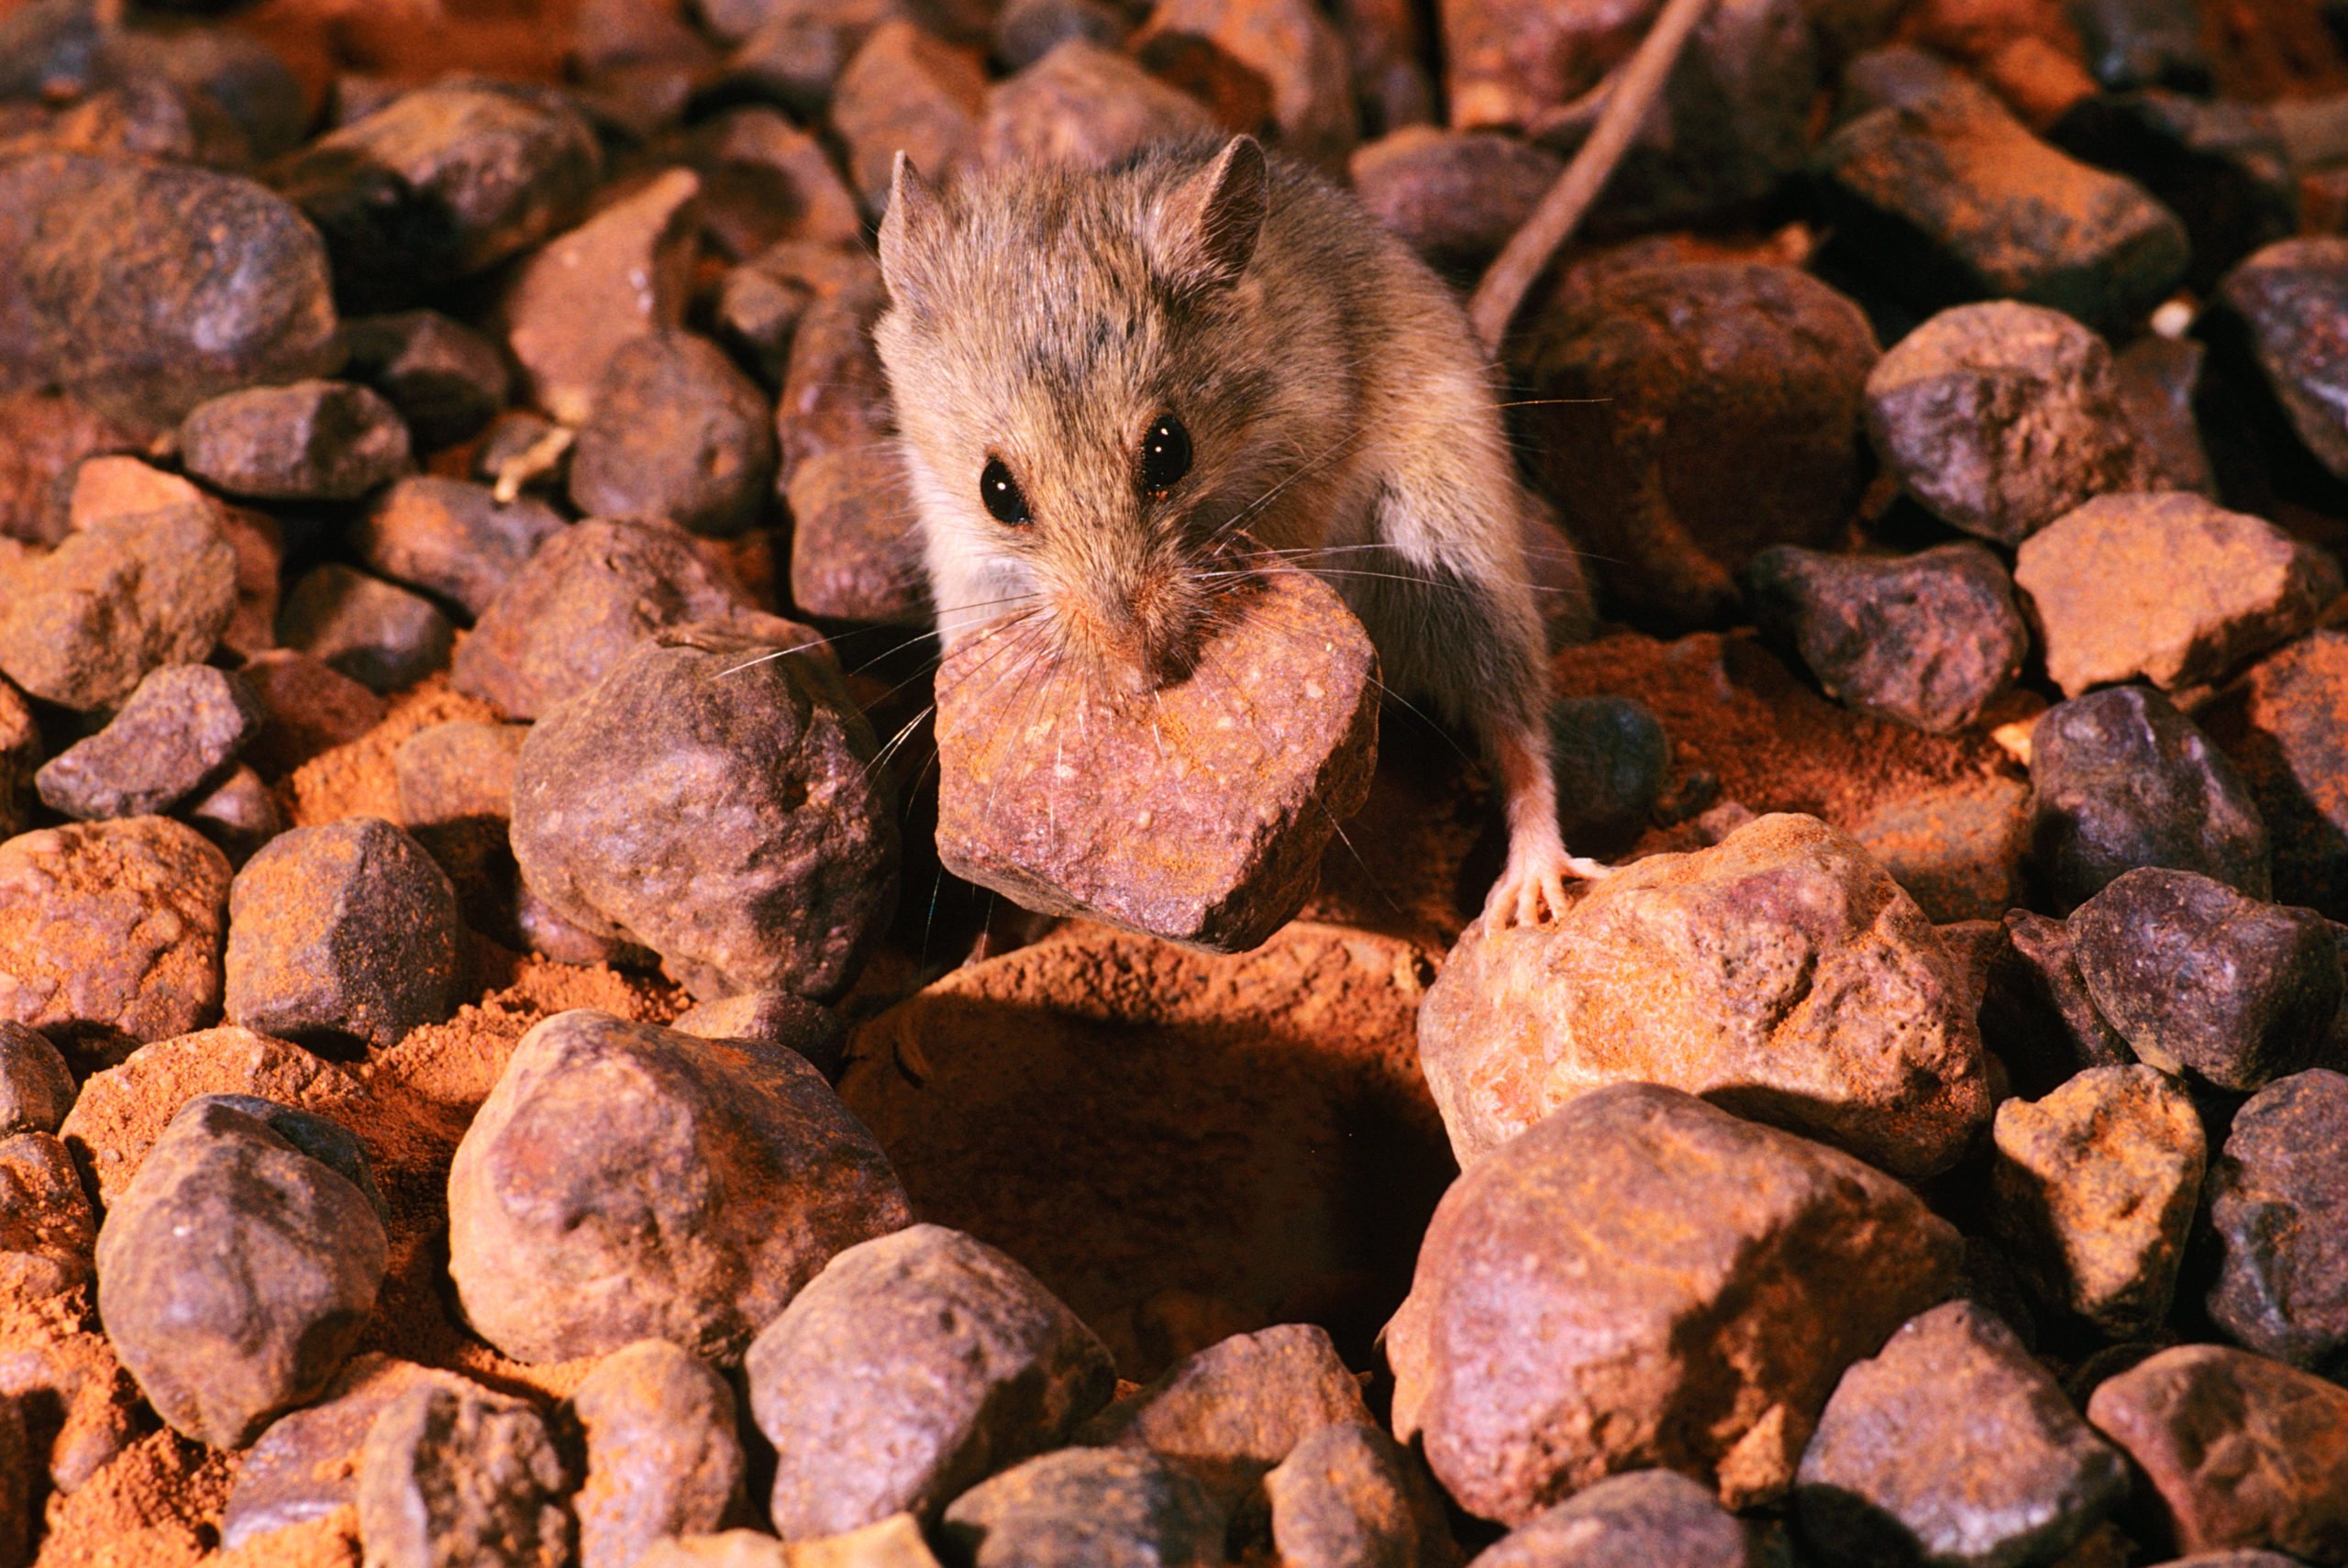 Western Pebble-mound Mouse (Pseudomys chapmani) with pebble in jaw to build mound home, northwestern Australia.